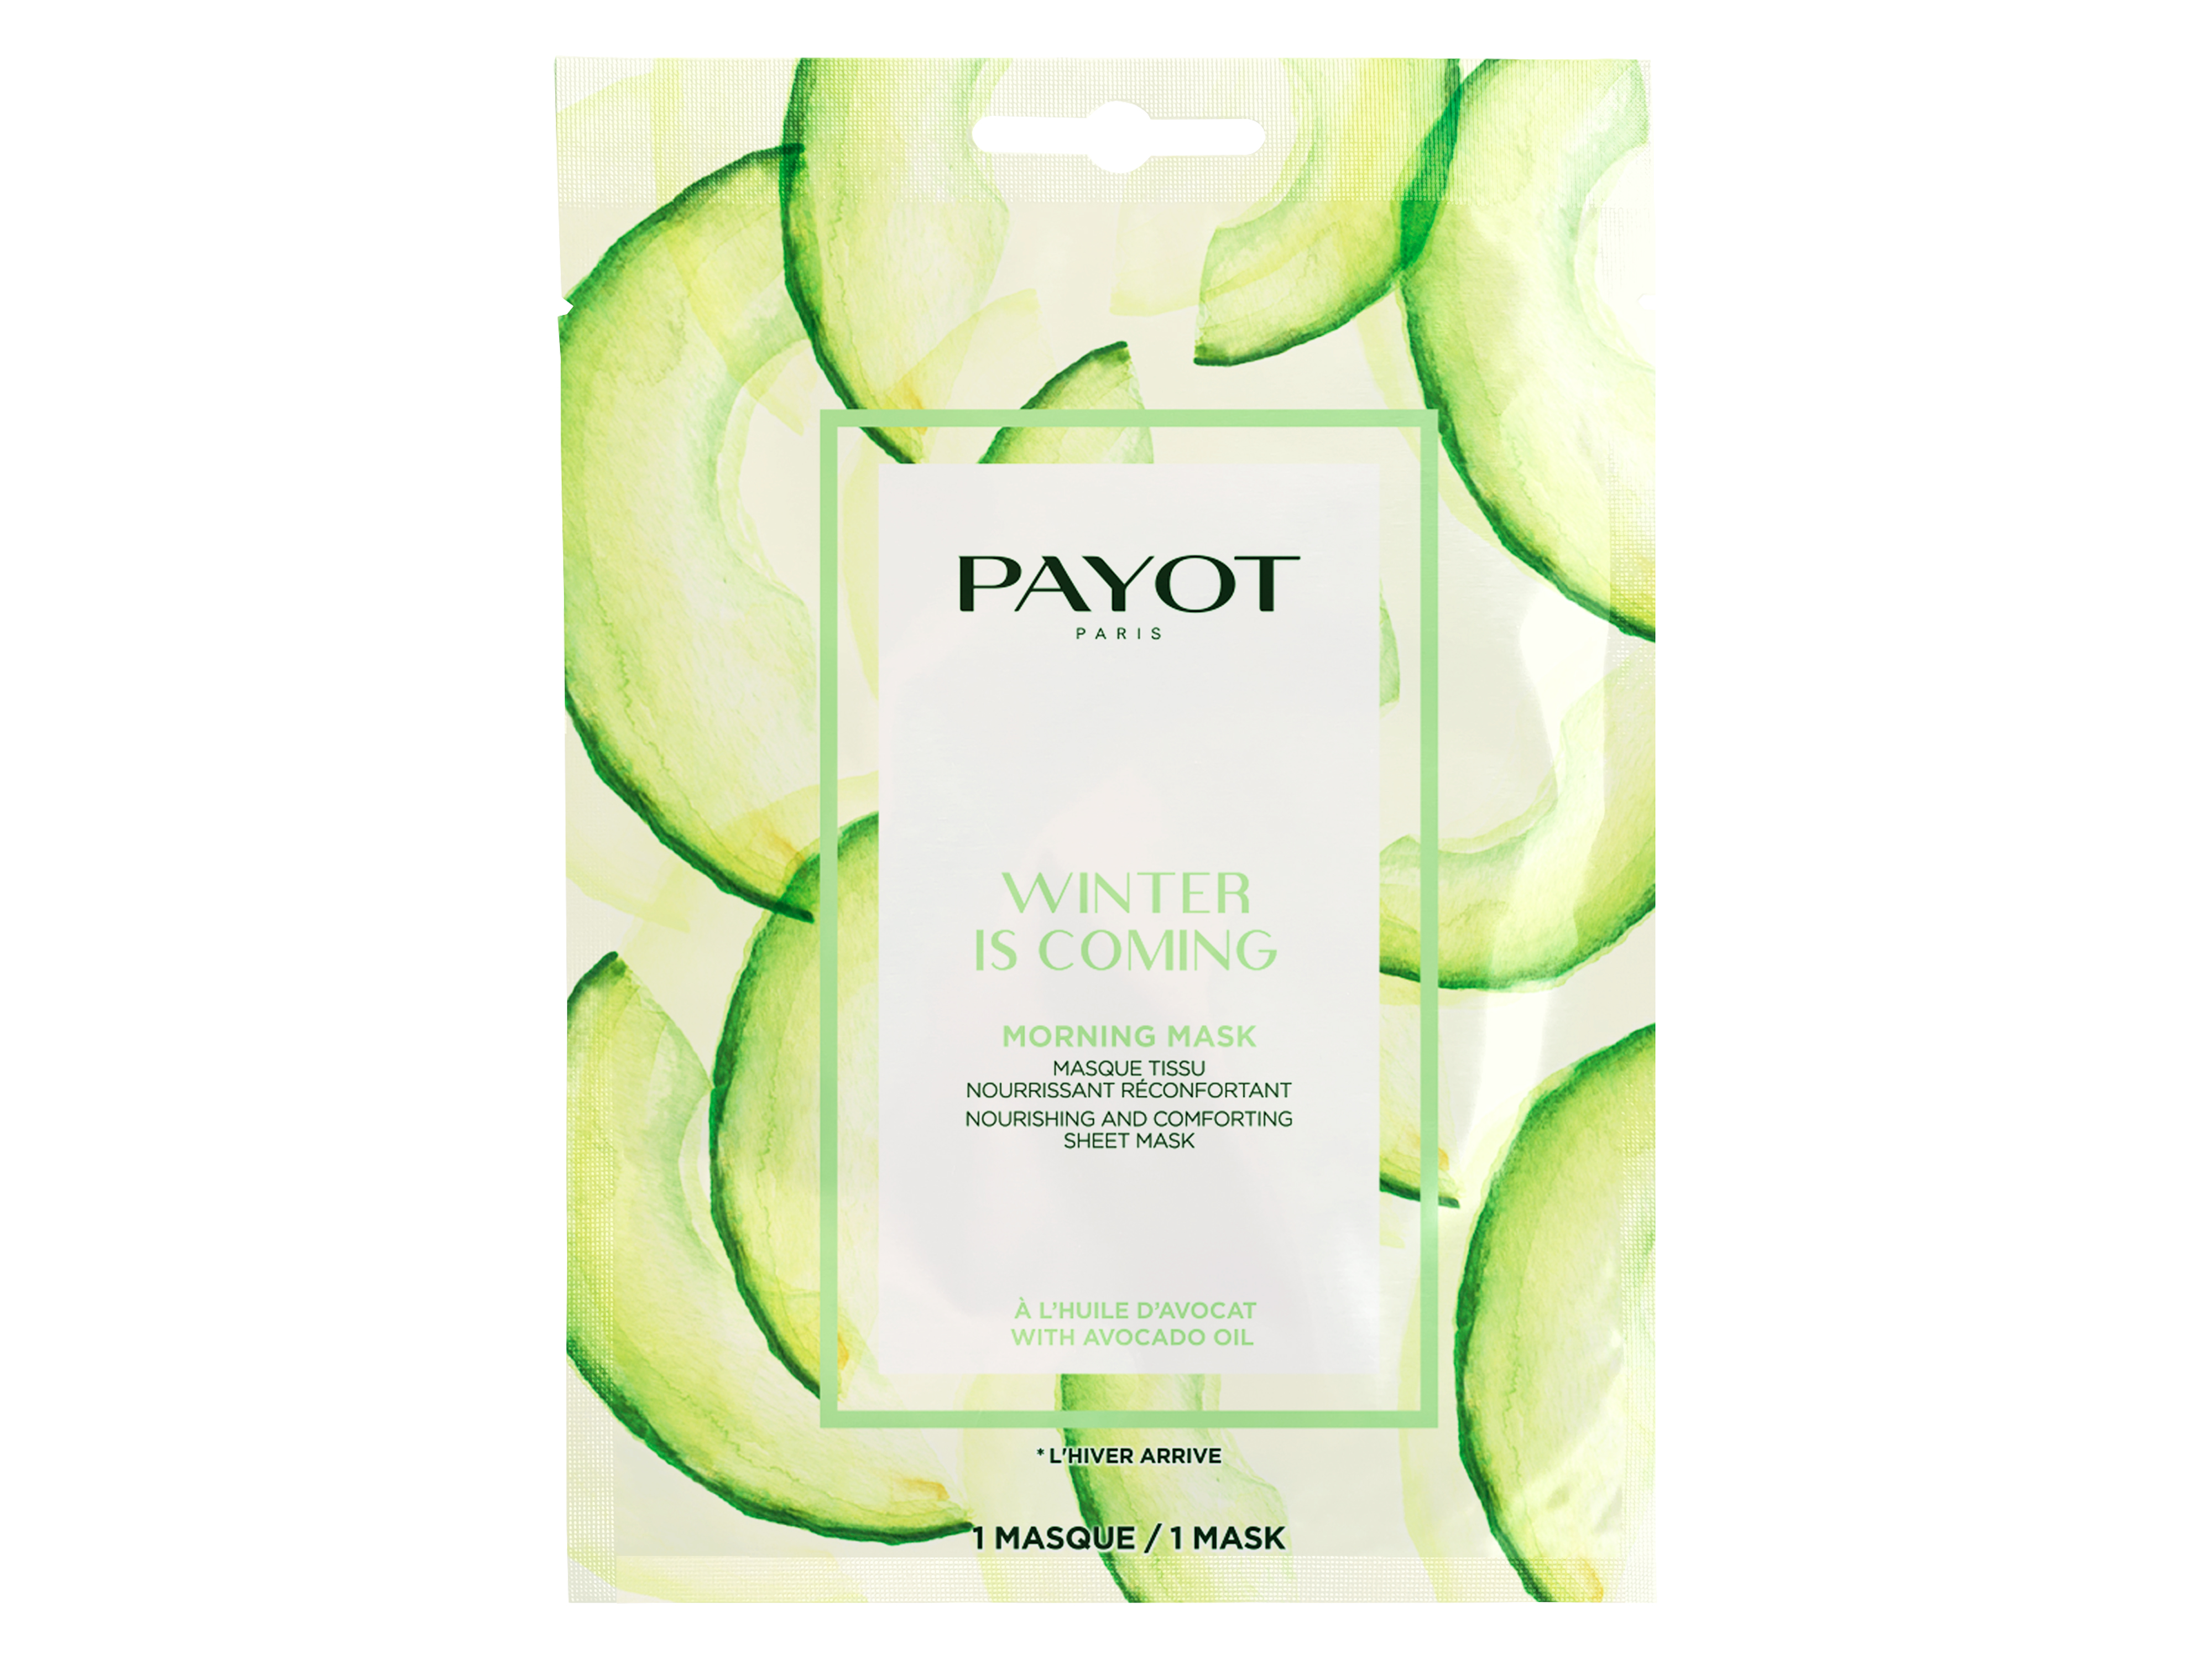 Payot Morning Mask Winter is Coming, 1 stk., 19 ml